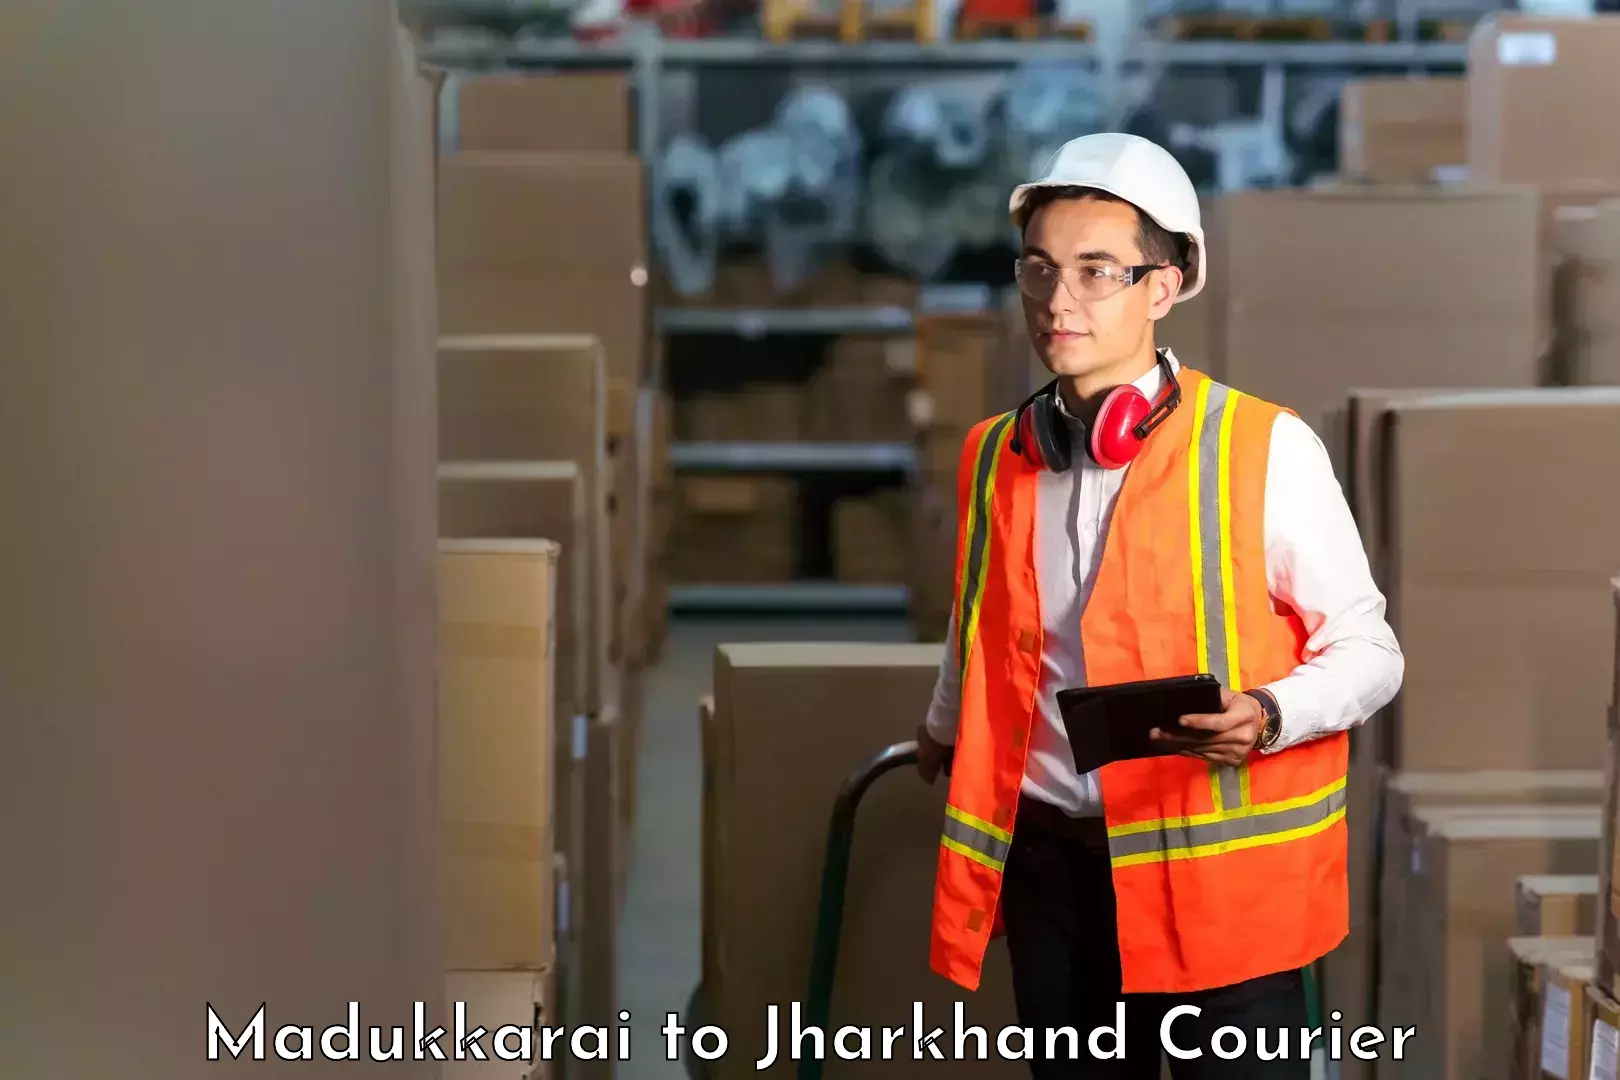 Reliable courier service in Madukkarai to Jharkhand